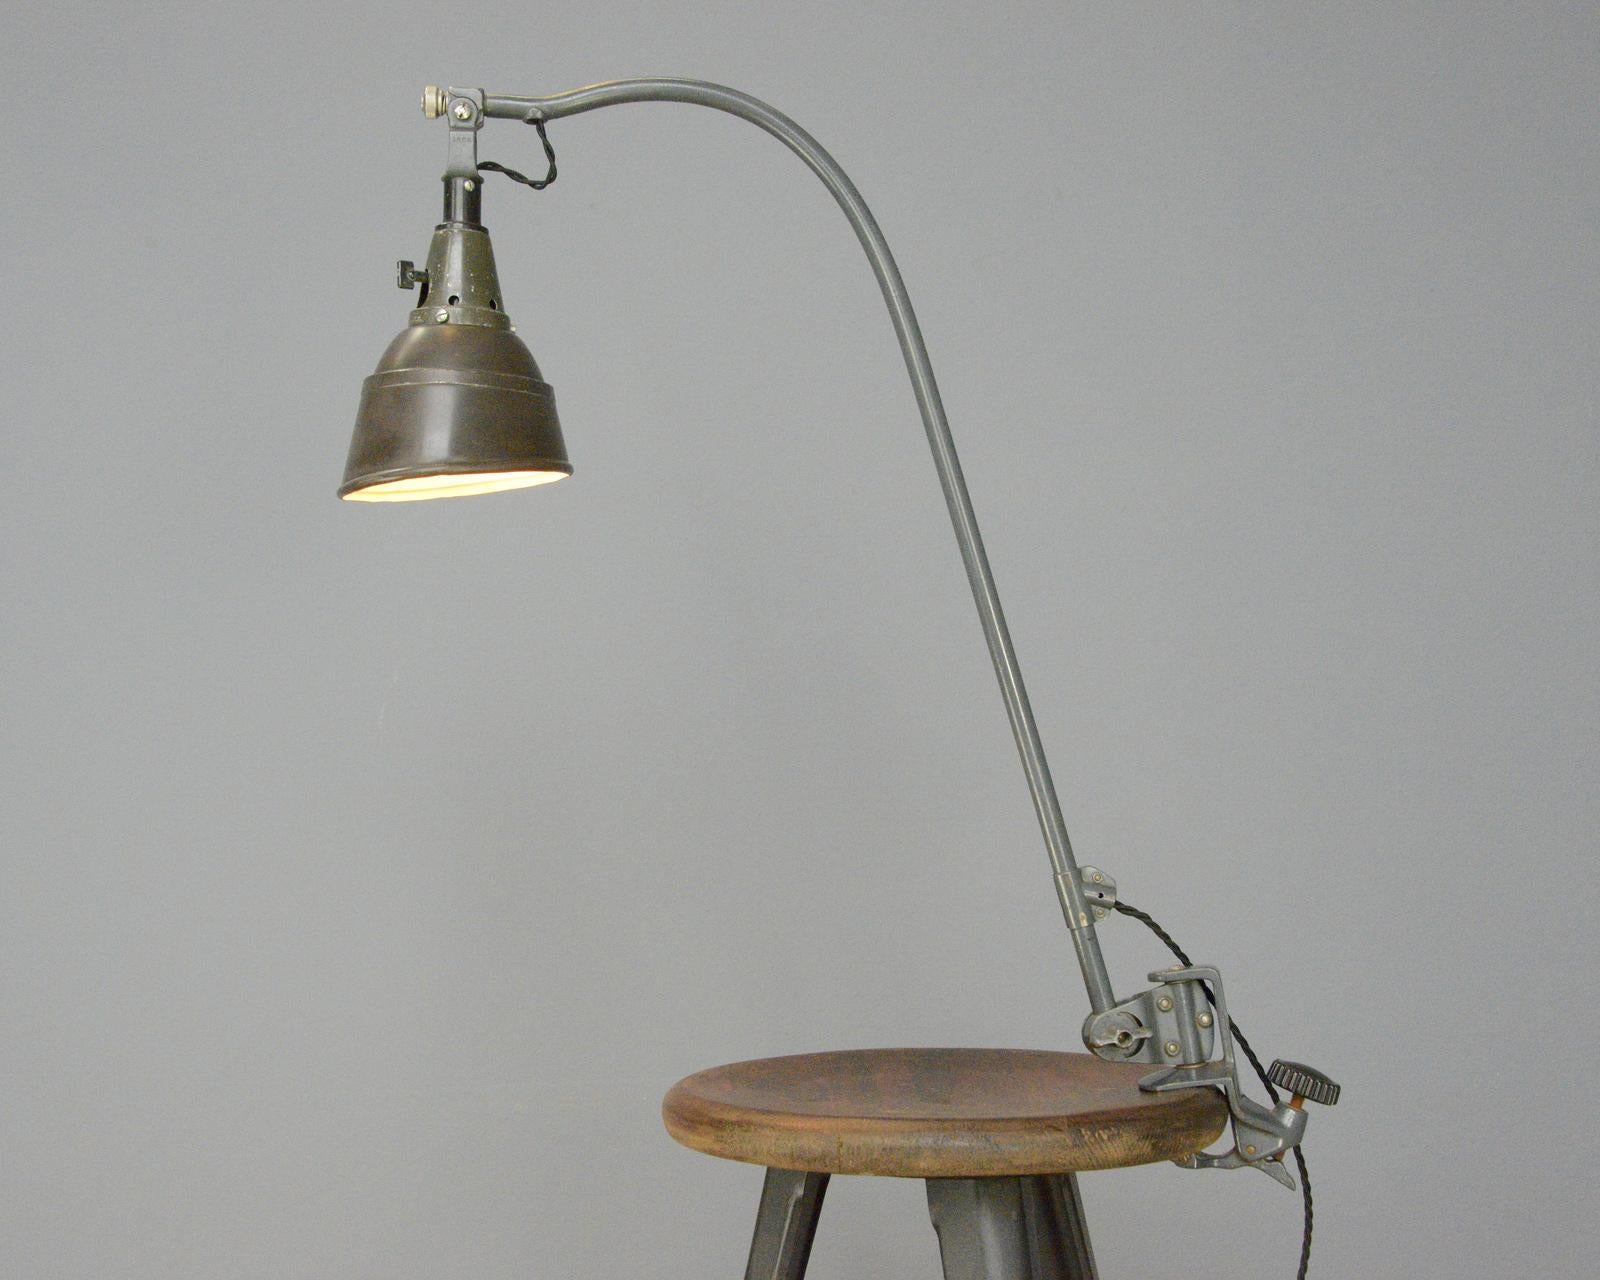 Steel Typ 113 Peitsche Table Lamp by Curt Fischer for Midgard circa 1940s For Sale